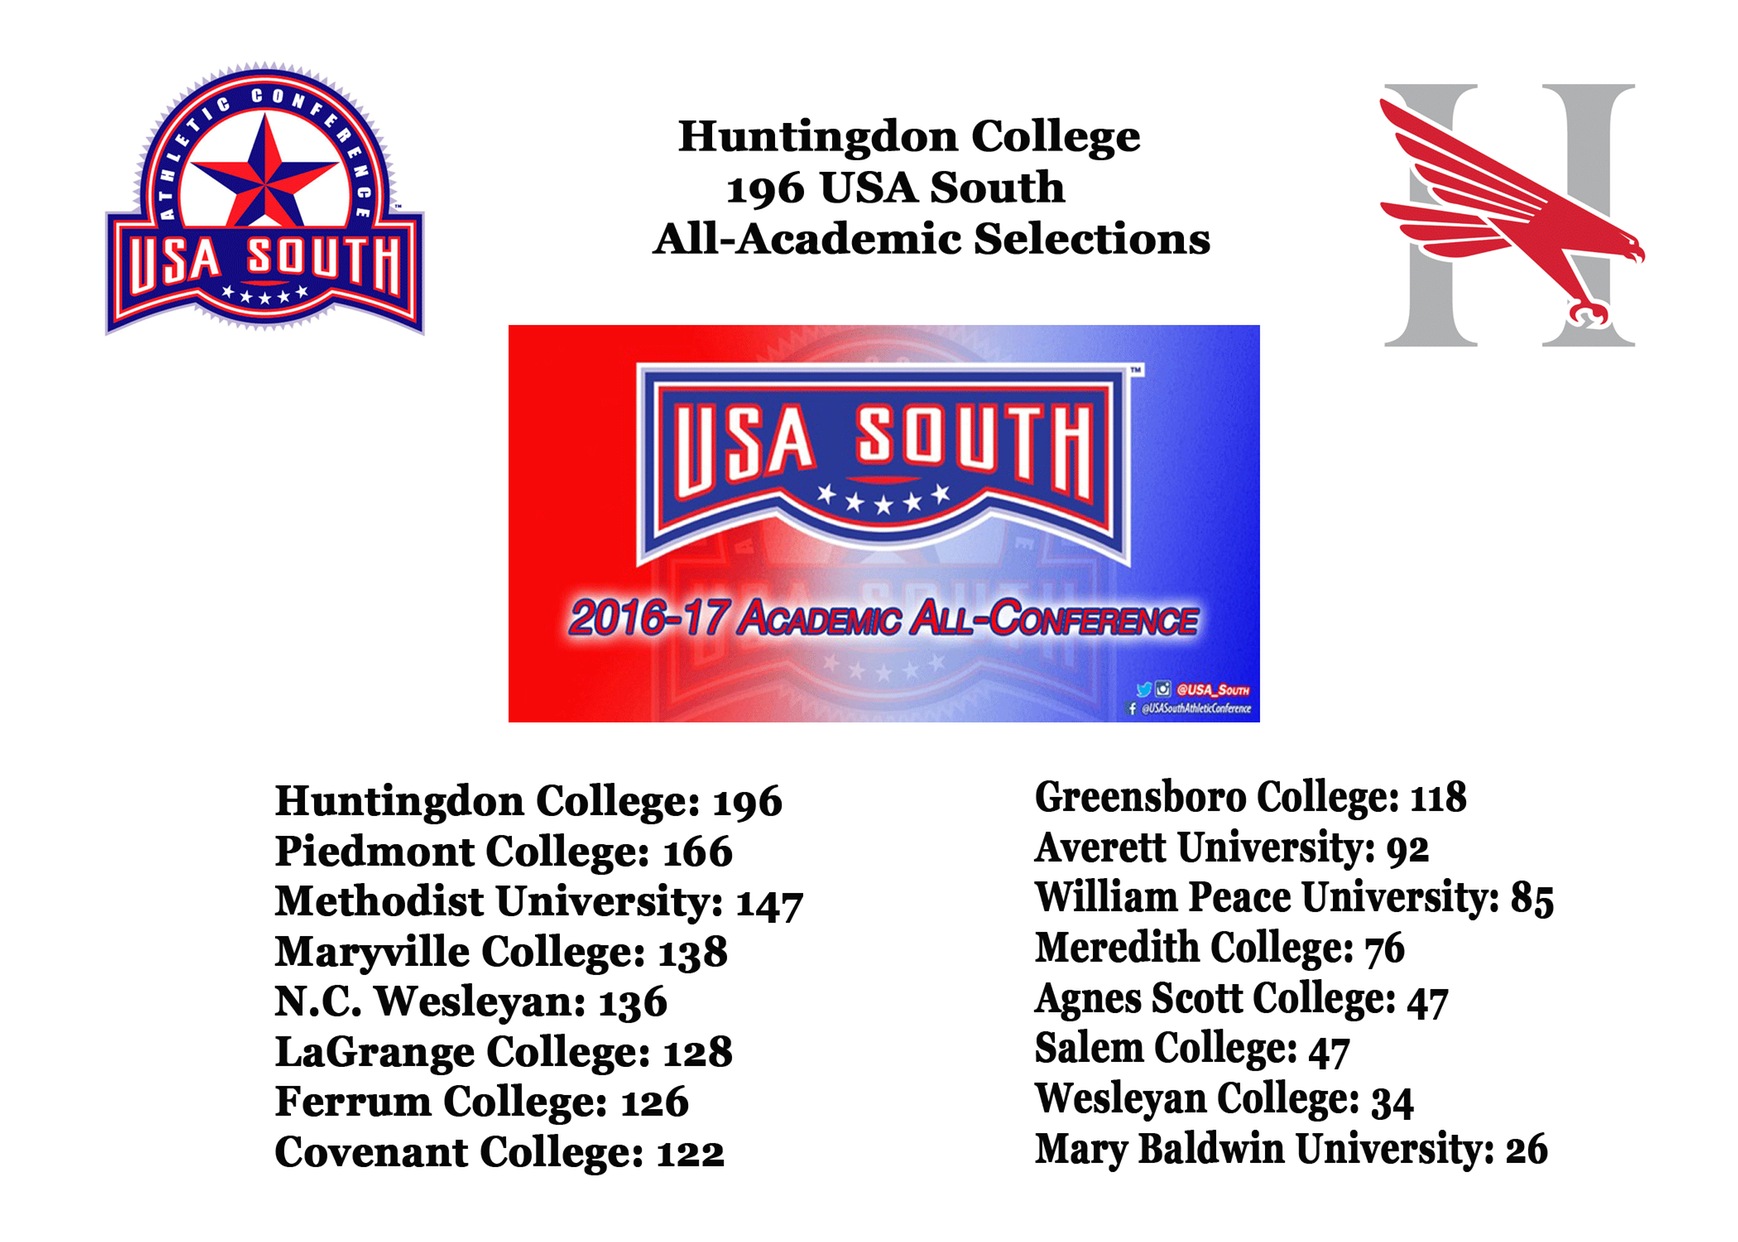 196 Hawks named to USA South Academic All-Conference Team